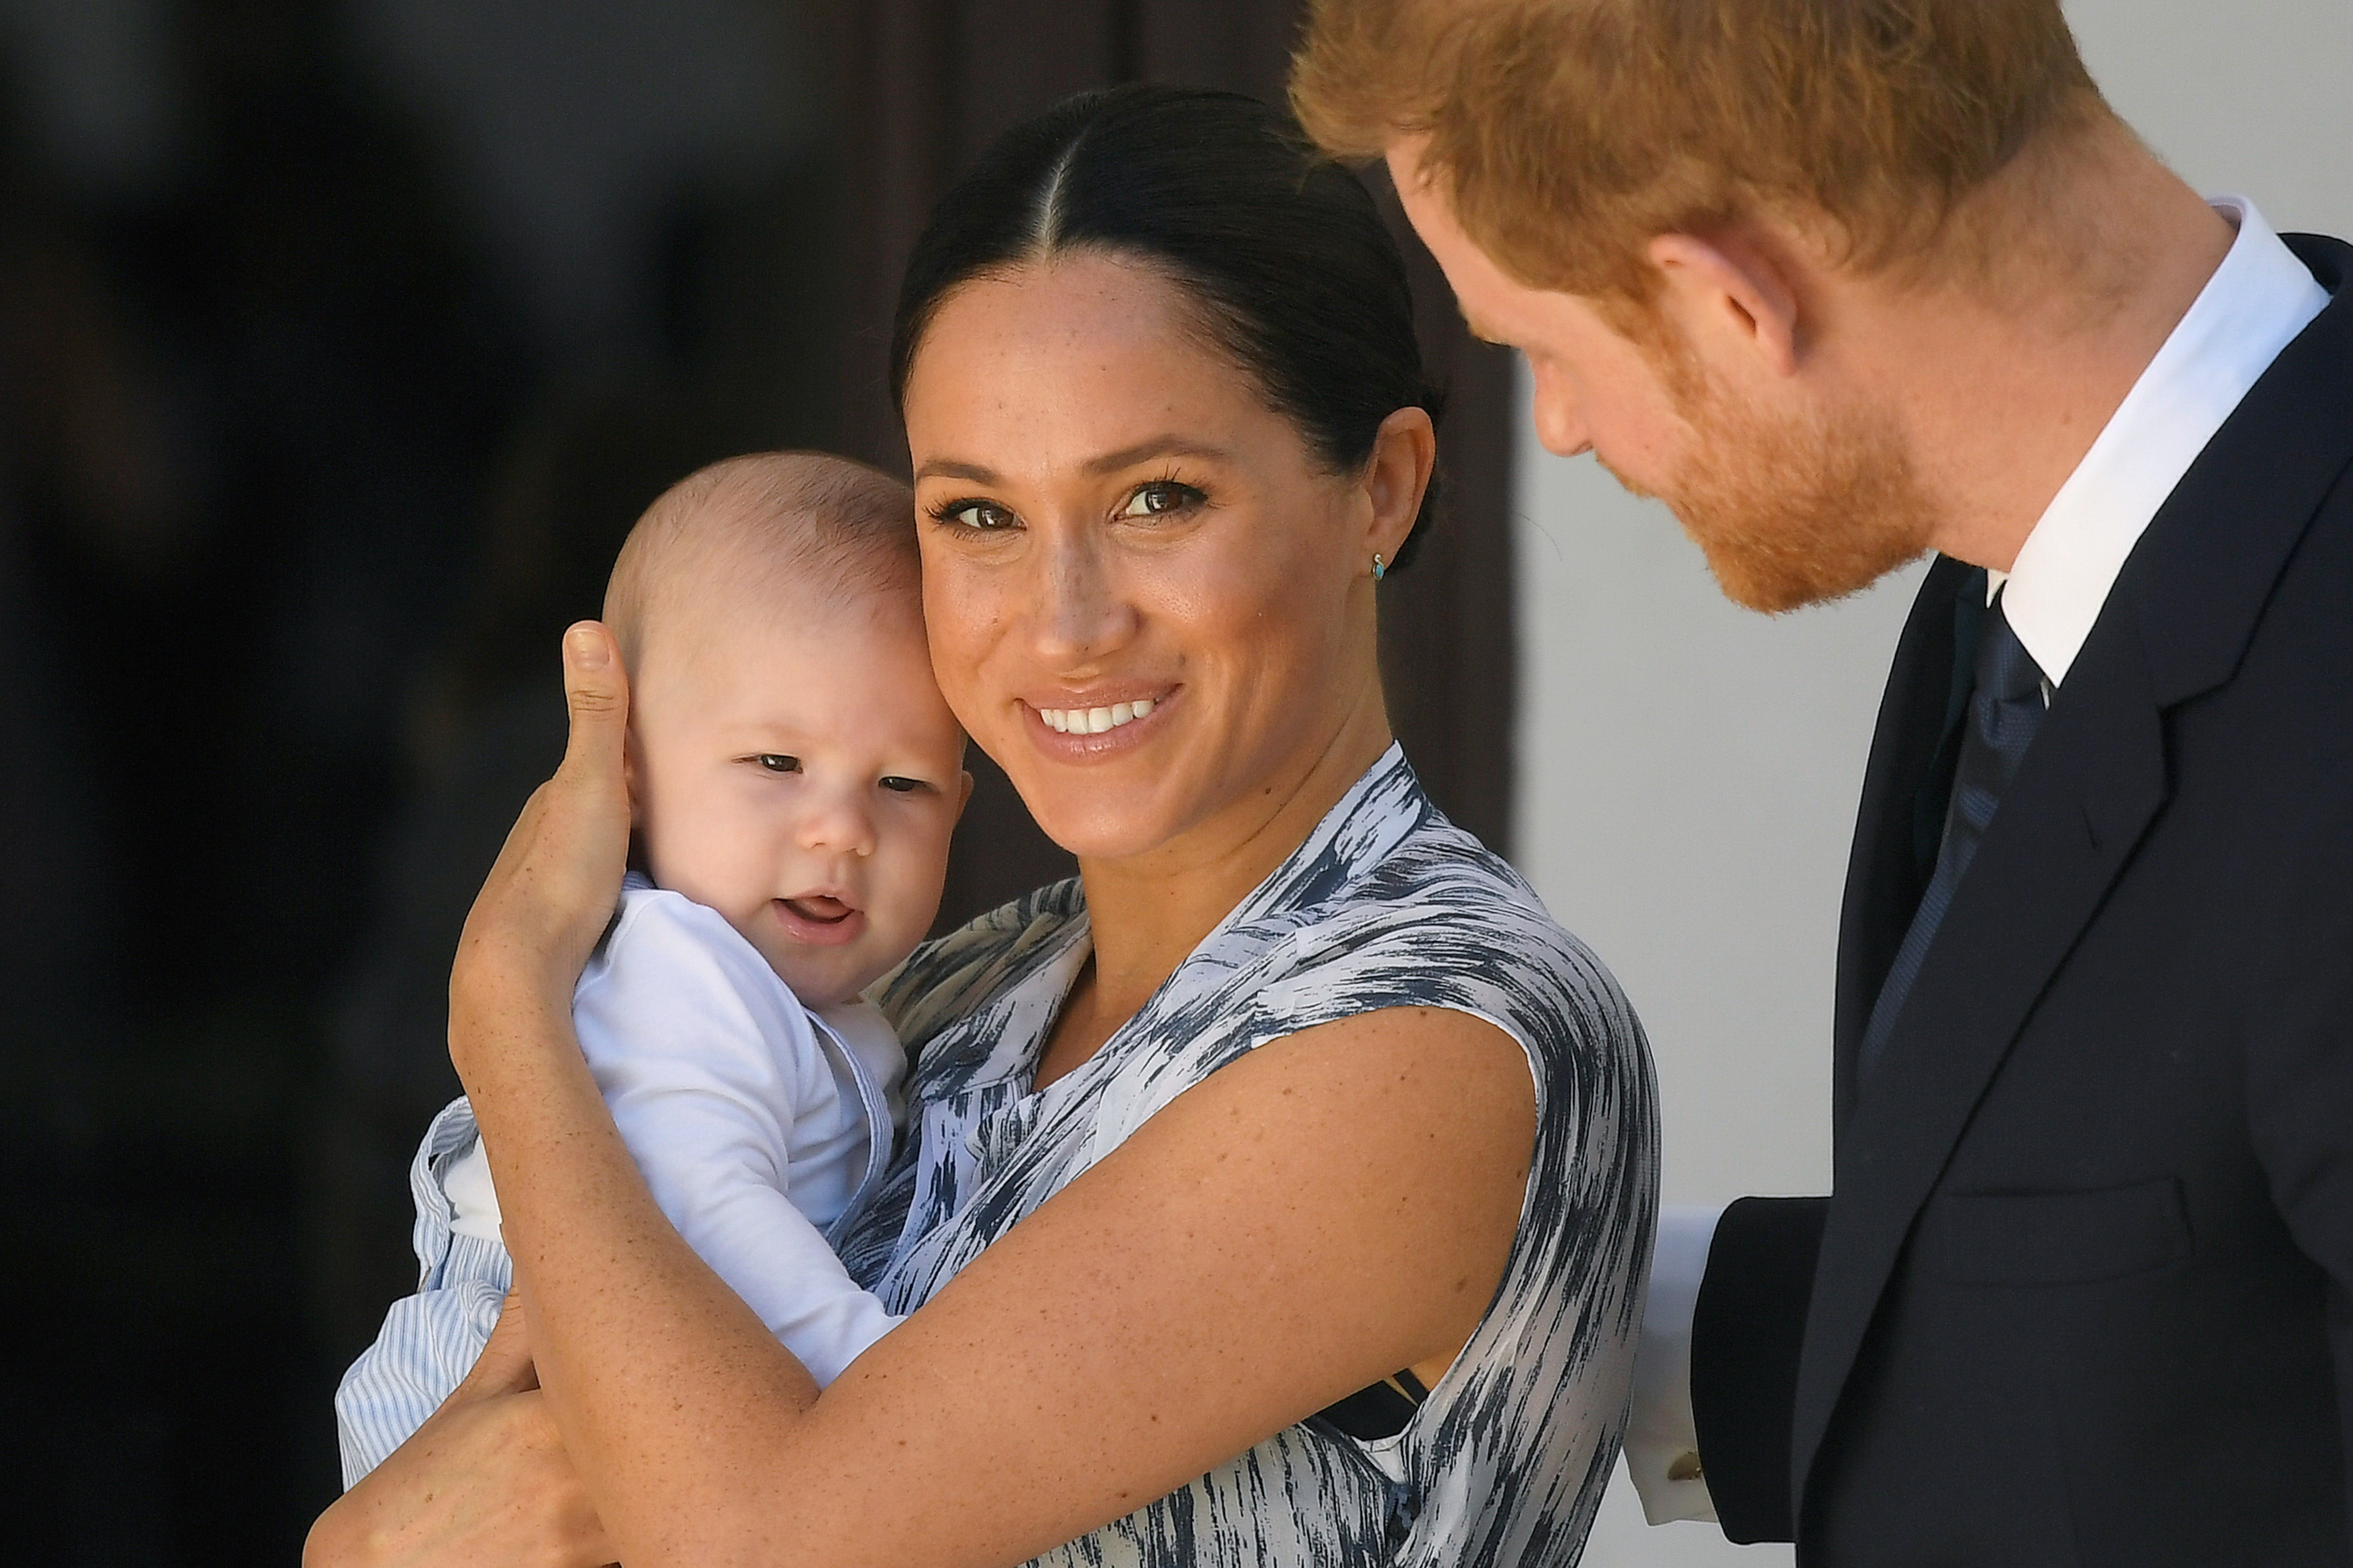 Prince Archie, Meghan Markle and Prince Harry during their trip to South Africa as part of their royal tour in Cape Town, South Africa on September 25, 2019 | Source: Getty Images